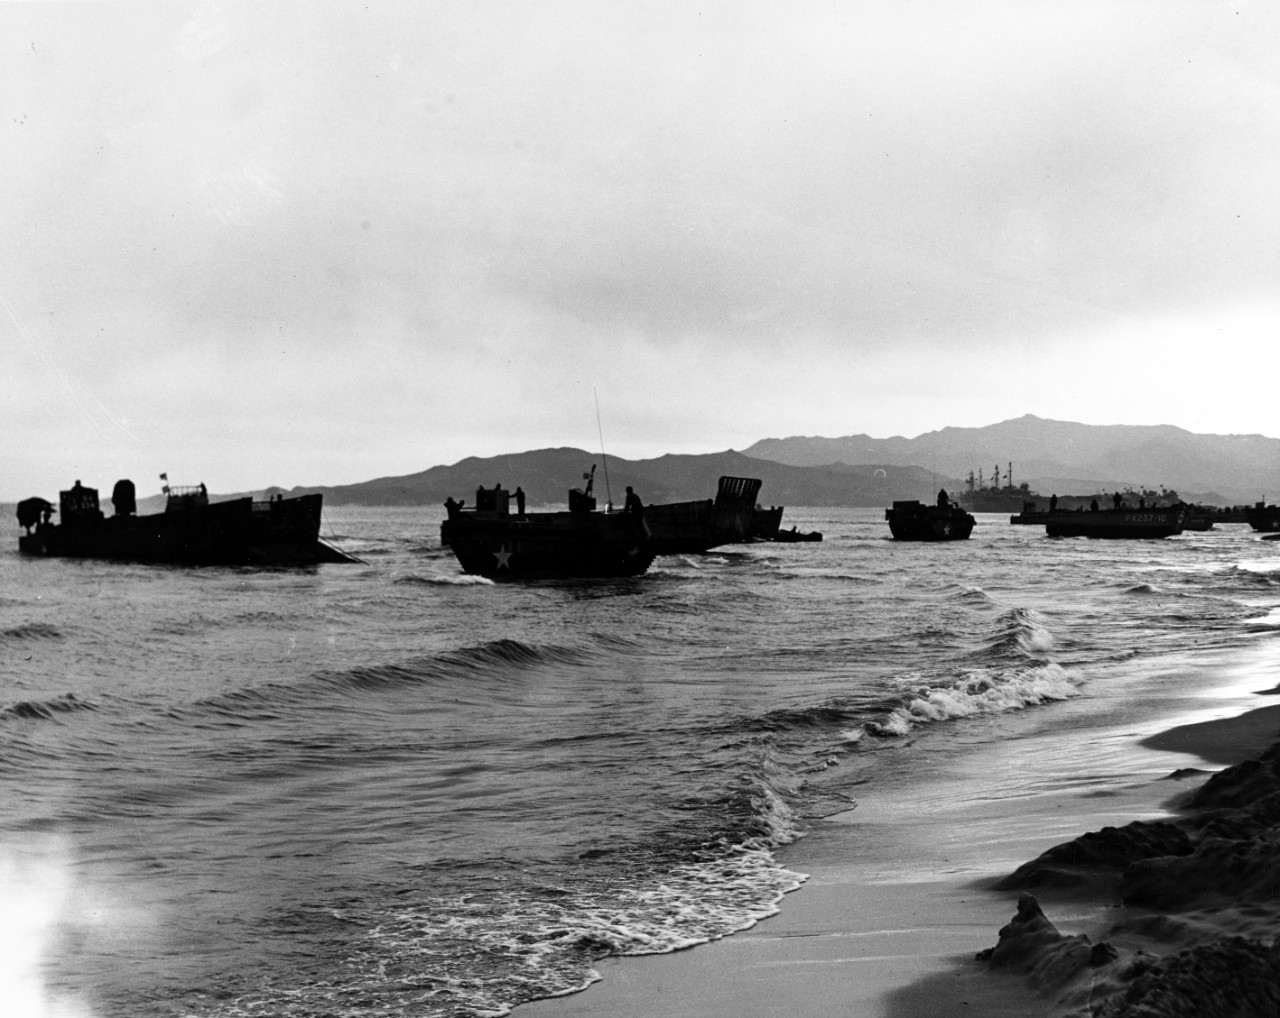 LCMs unloading on the Kalmo Pando beaches, at Wonsan, North Korea, with LVTs standing by to assist, 26 October 1950.